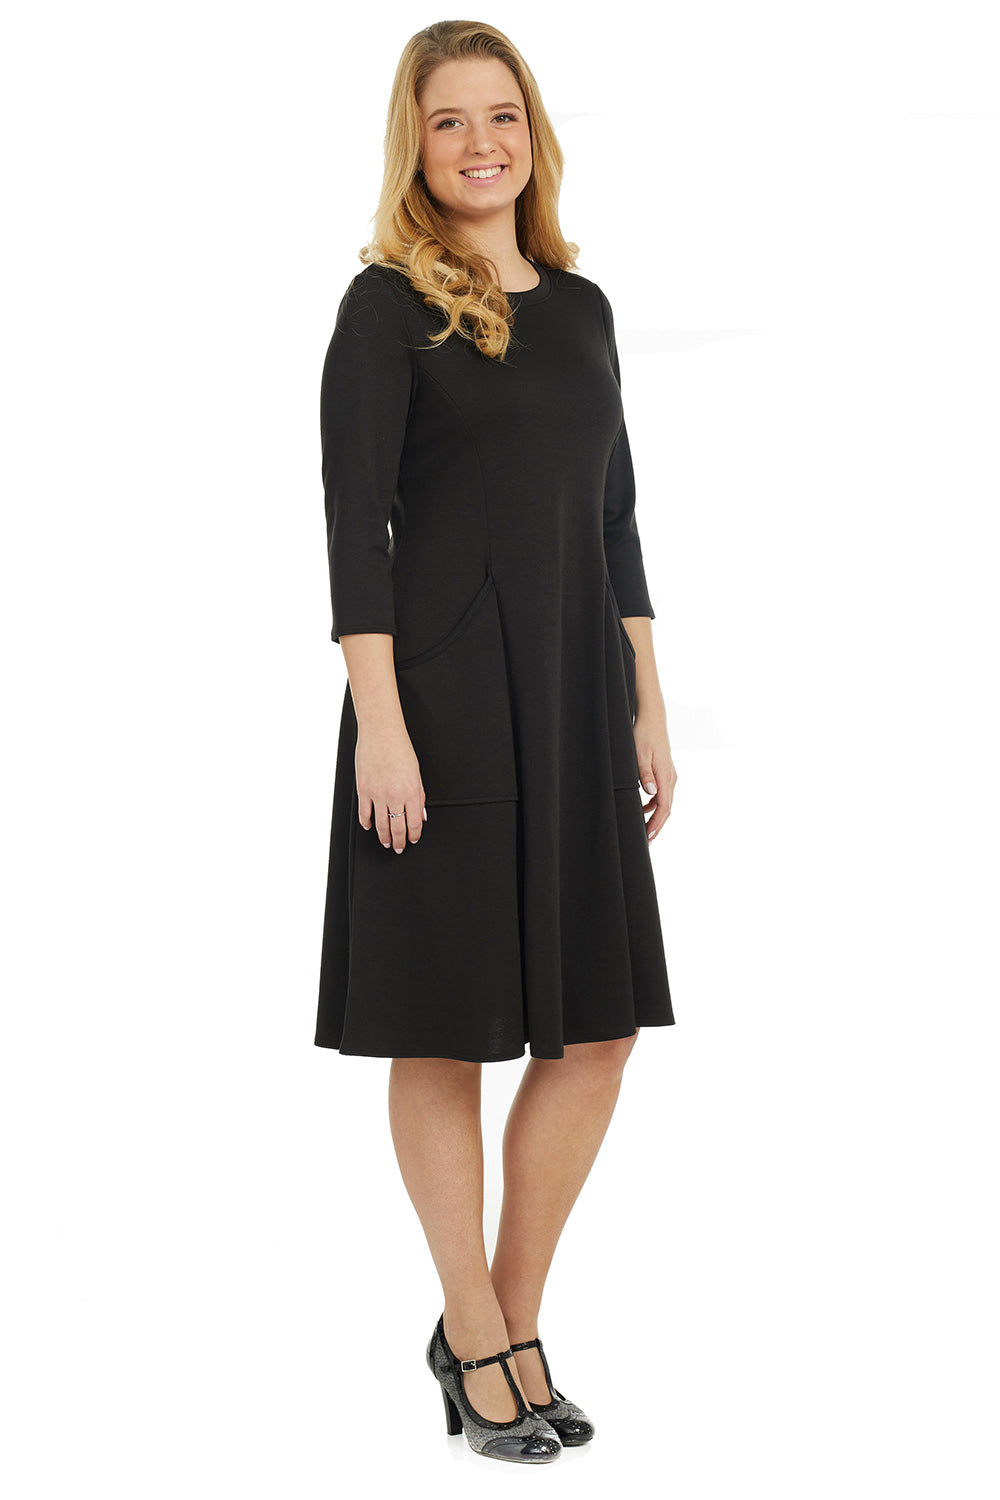 Esteez MEGAN Dress - Womens Classic Fit and Flare Dress with pockets - BLACK